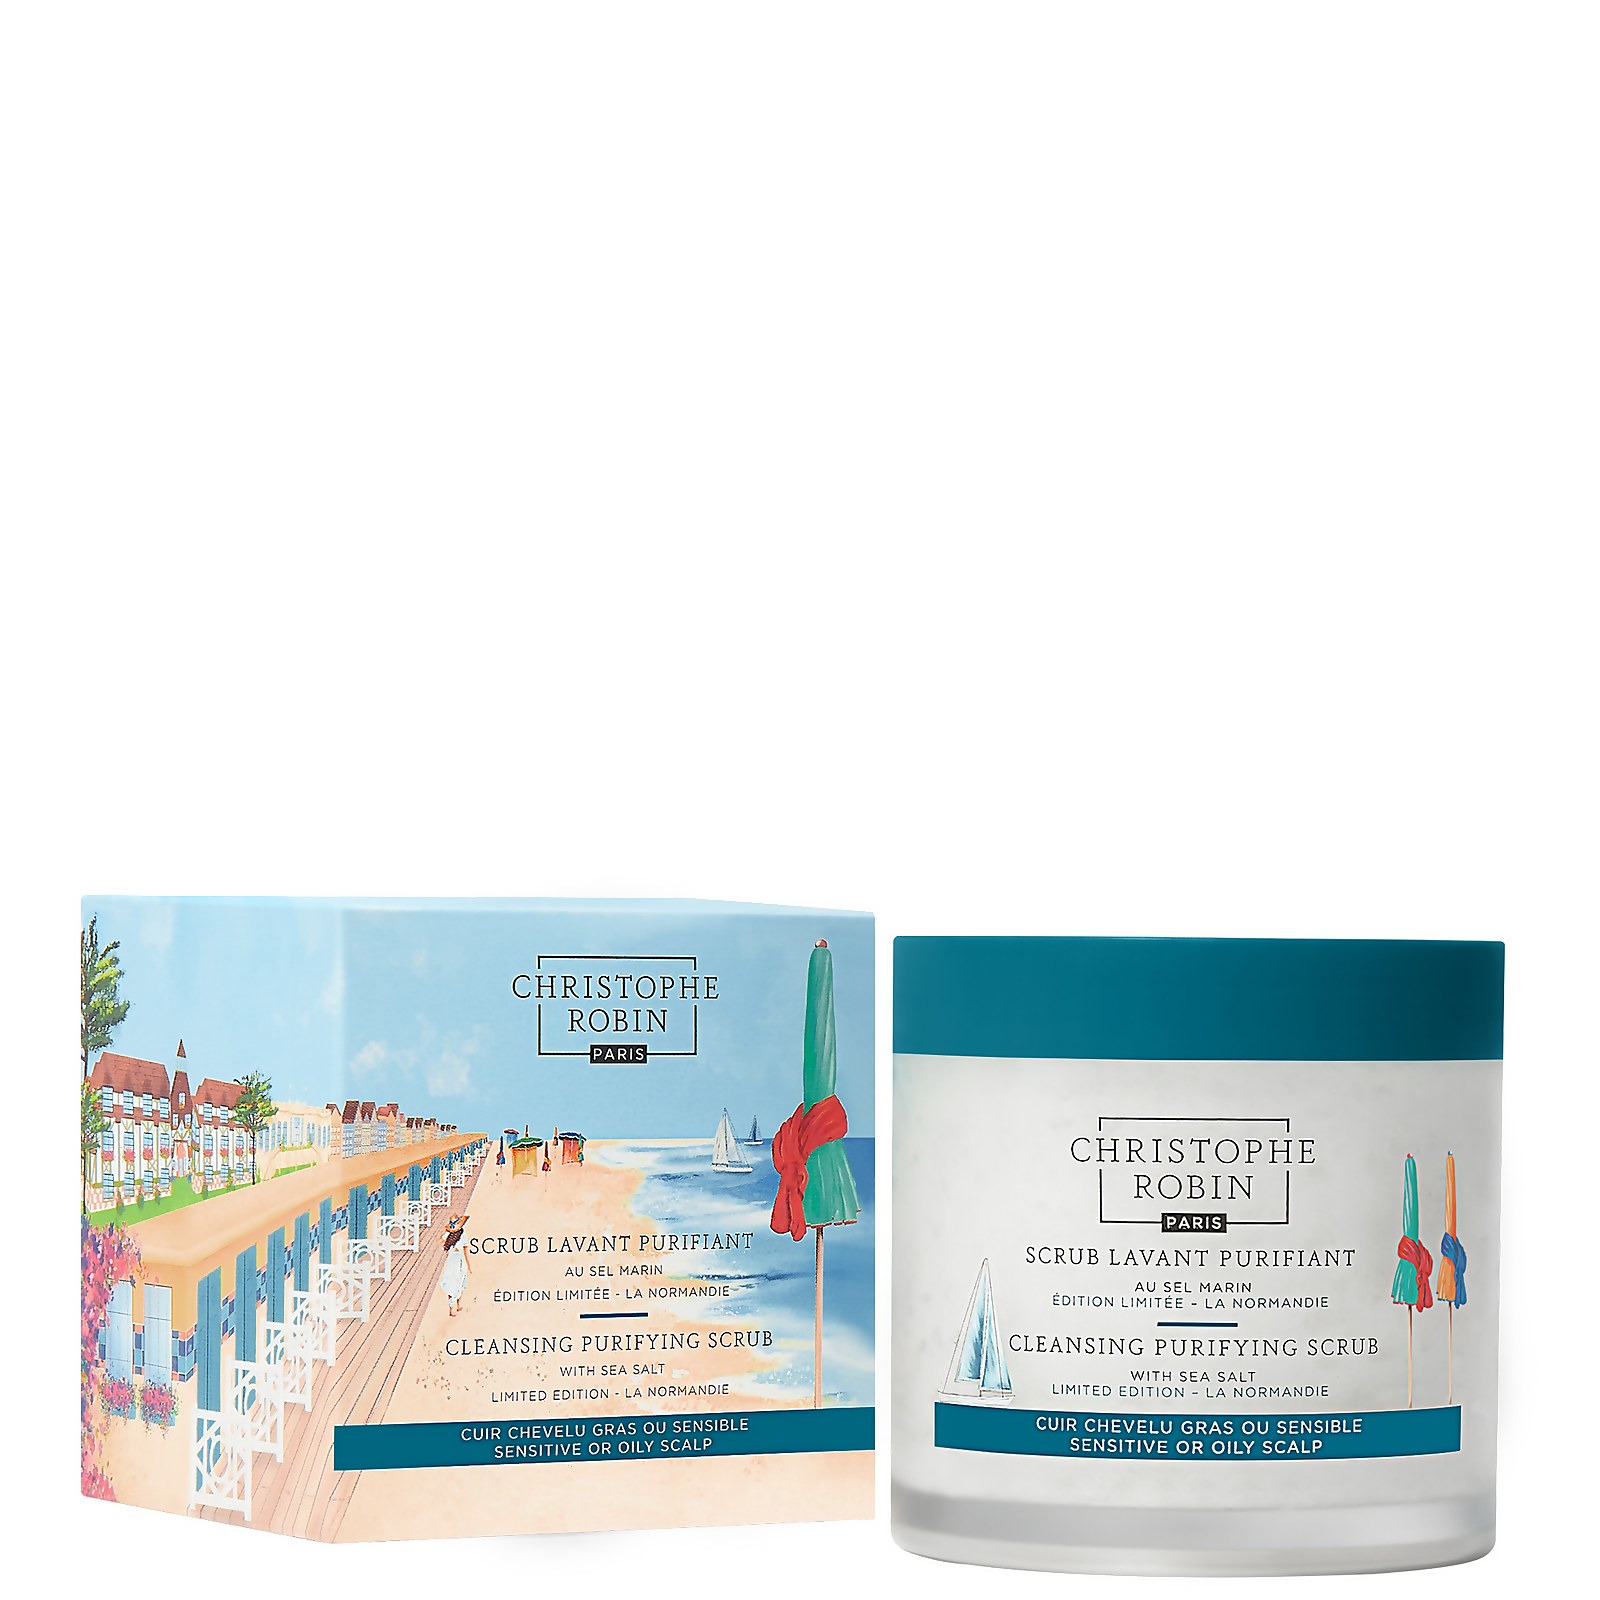 Christophe Robin Cleansing Purifying Scrub With Sea Salt Limited Edition La Normandie In White